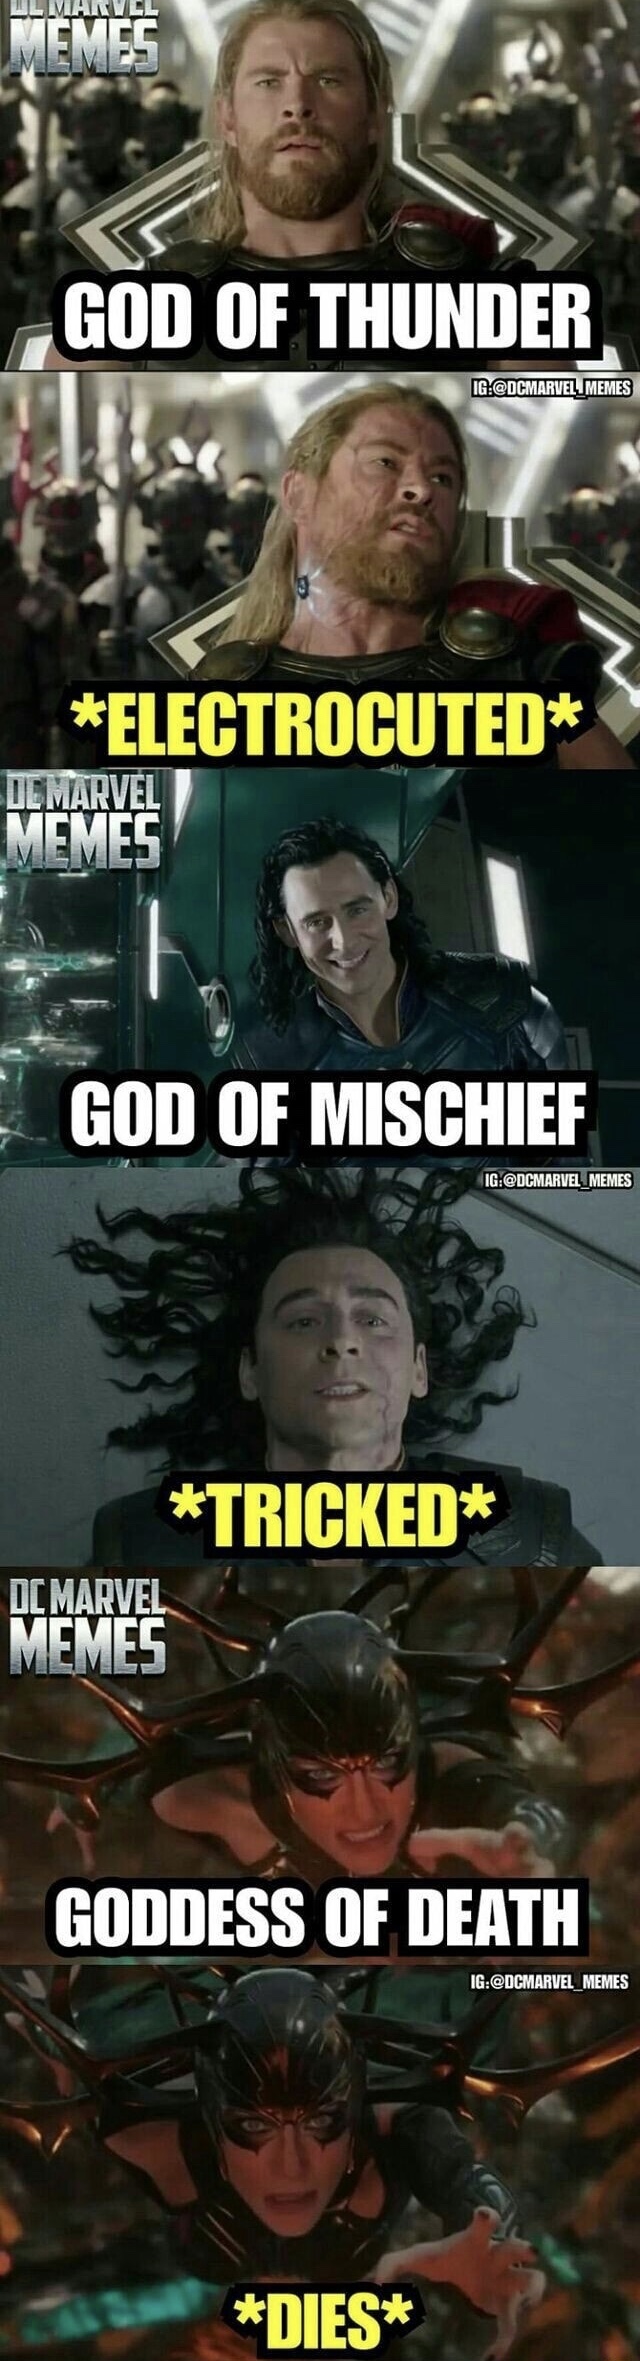 memes - goddess of death dies - Te God Of Thunder Whi Electrocuted Merce God Of Mischief Tricked Marvel Memes Goddess Of Death Dies